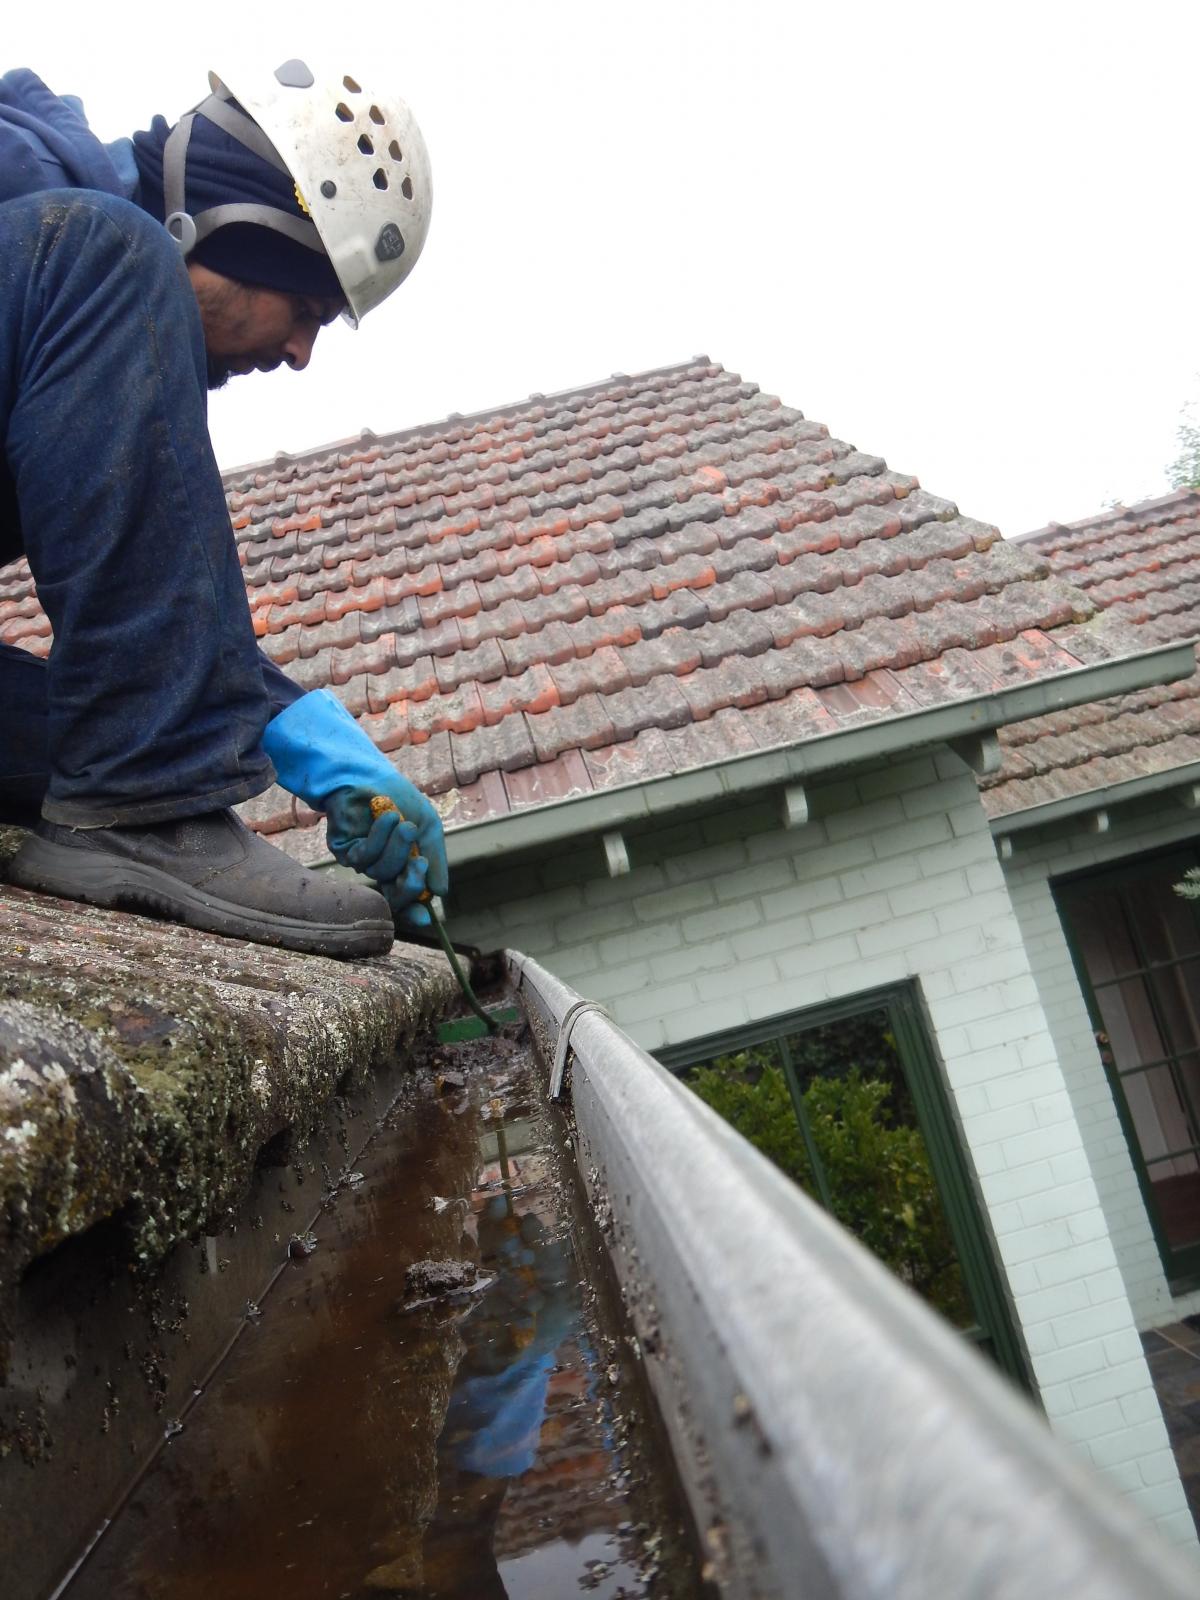 How gutters can silt up even with no trees around